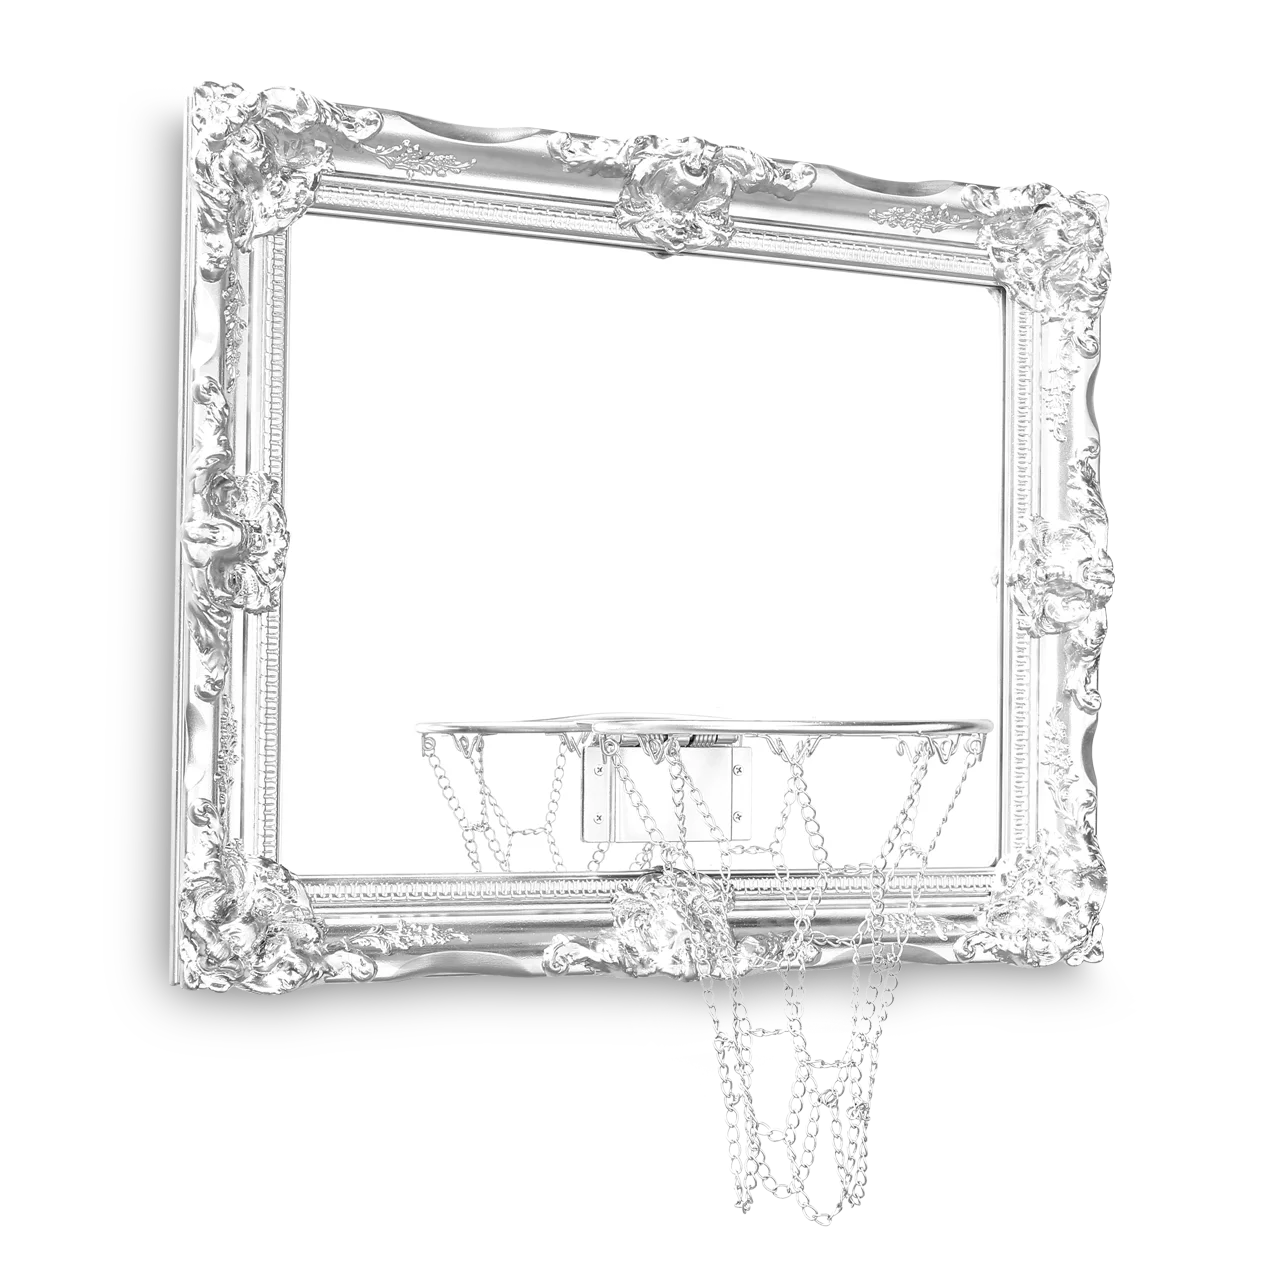 An ornate frame with a captivating Mirror Hoop.